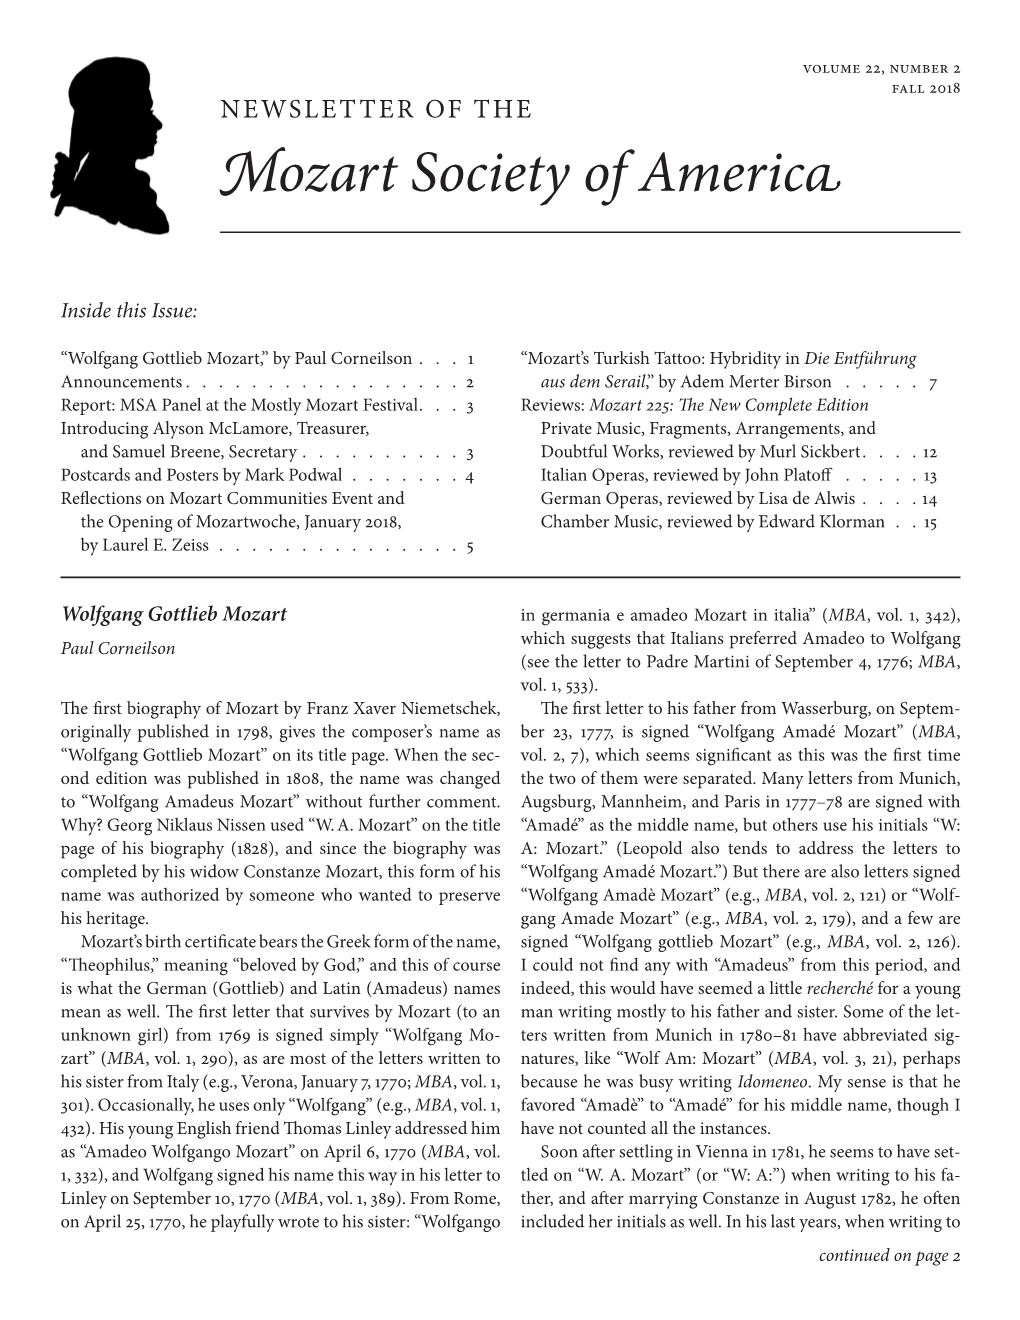 Fall 2018 NEWSLETTER of the Mozart Society of America